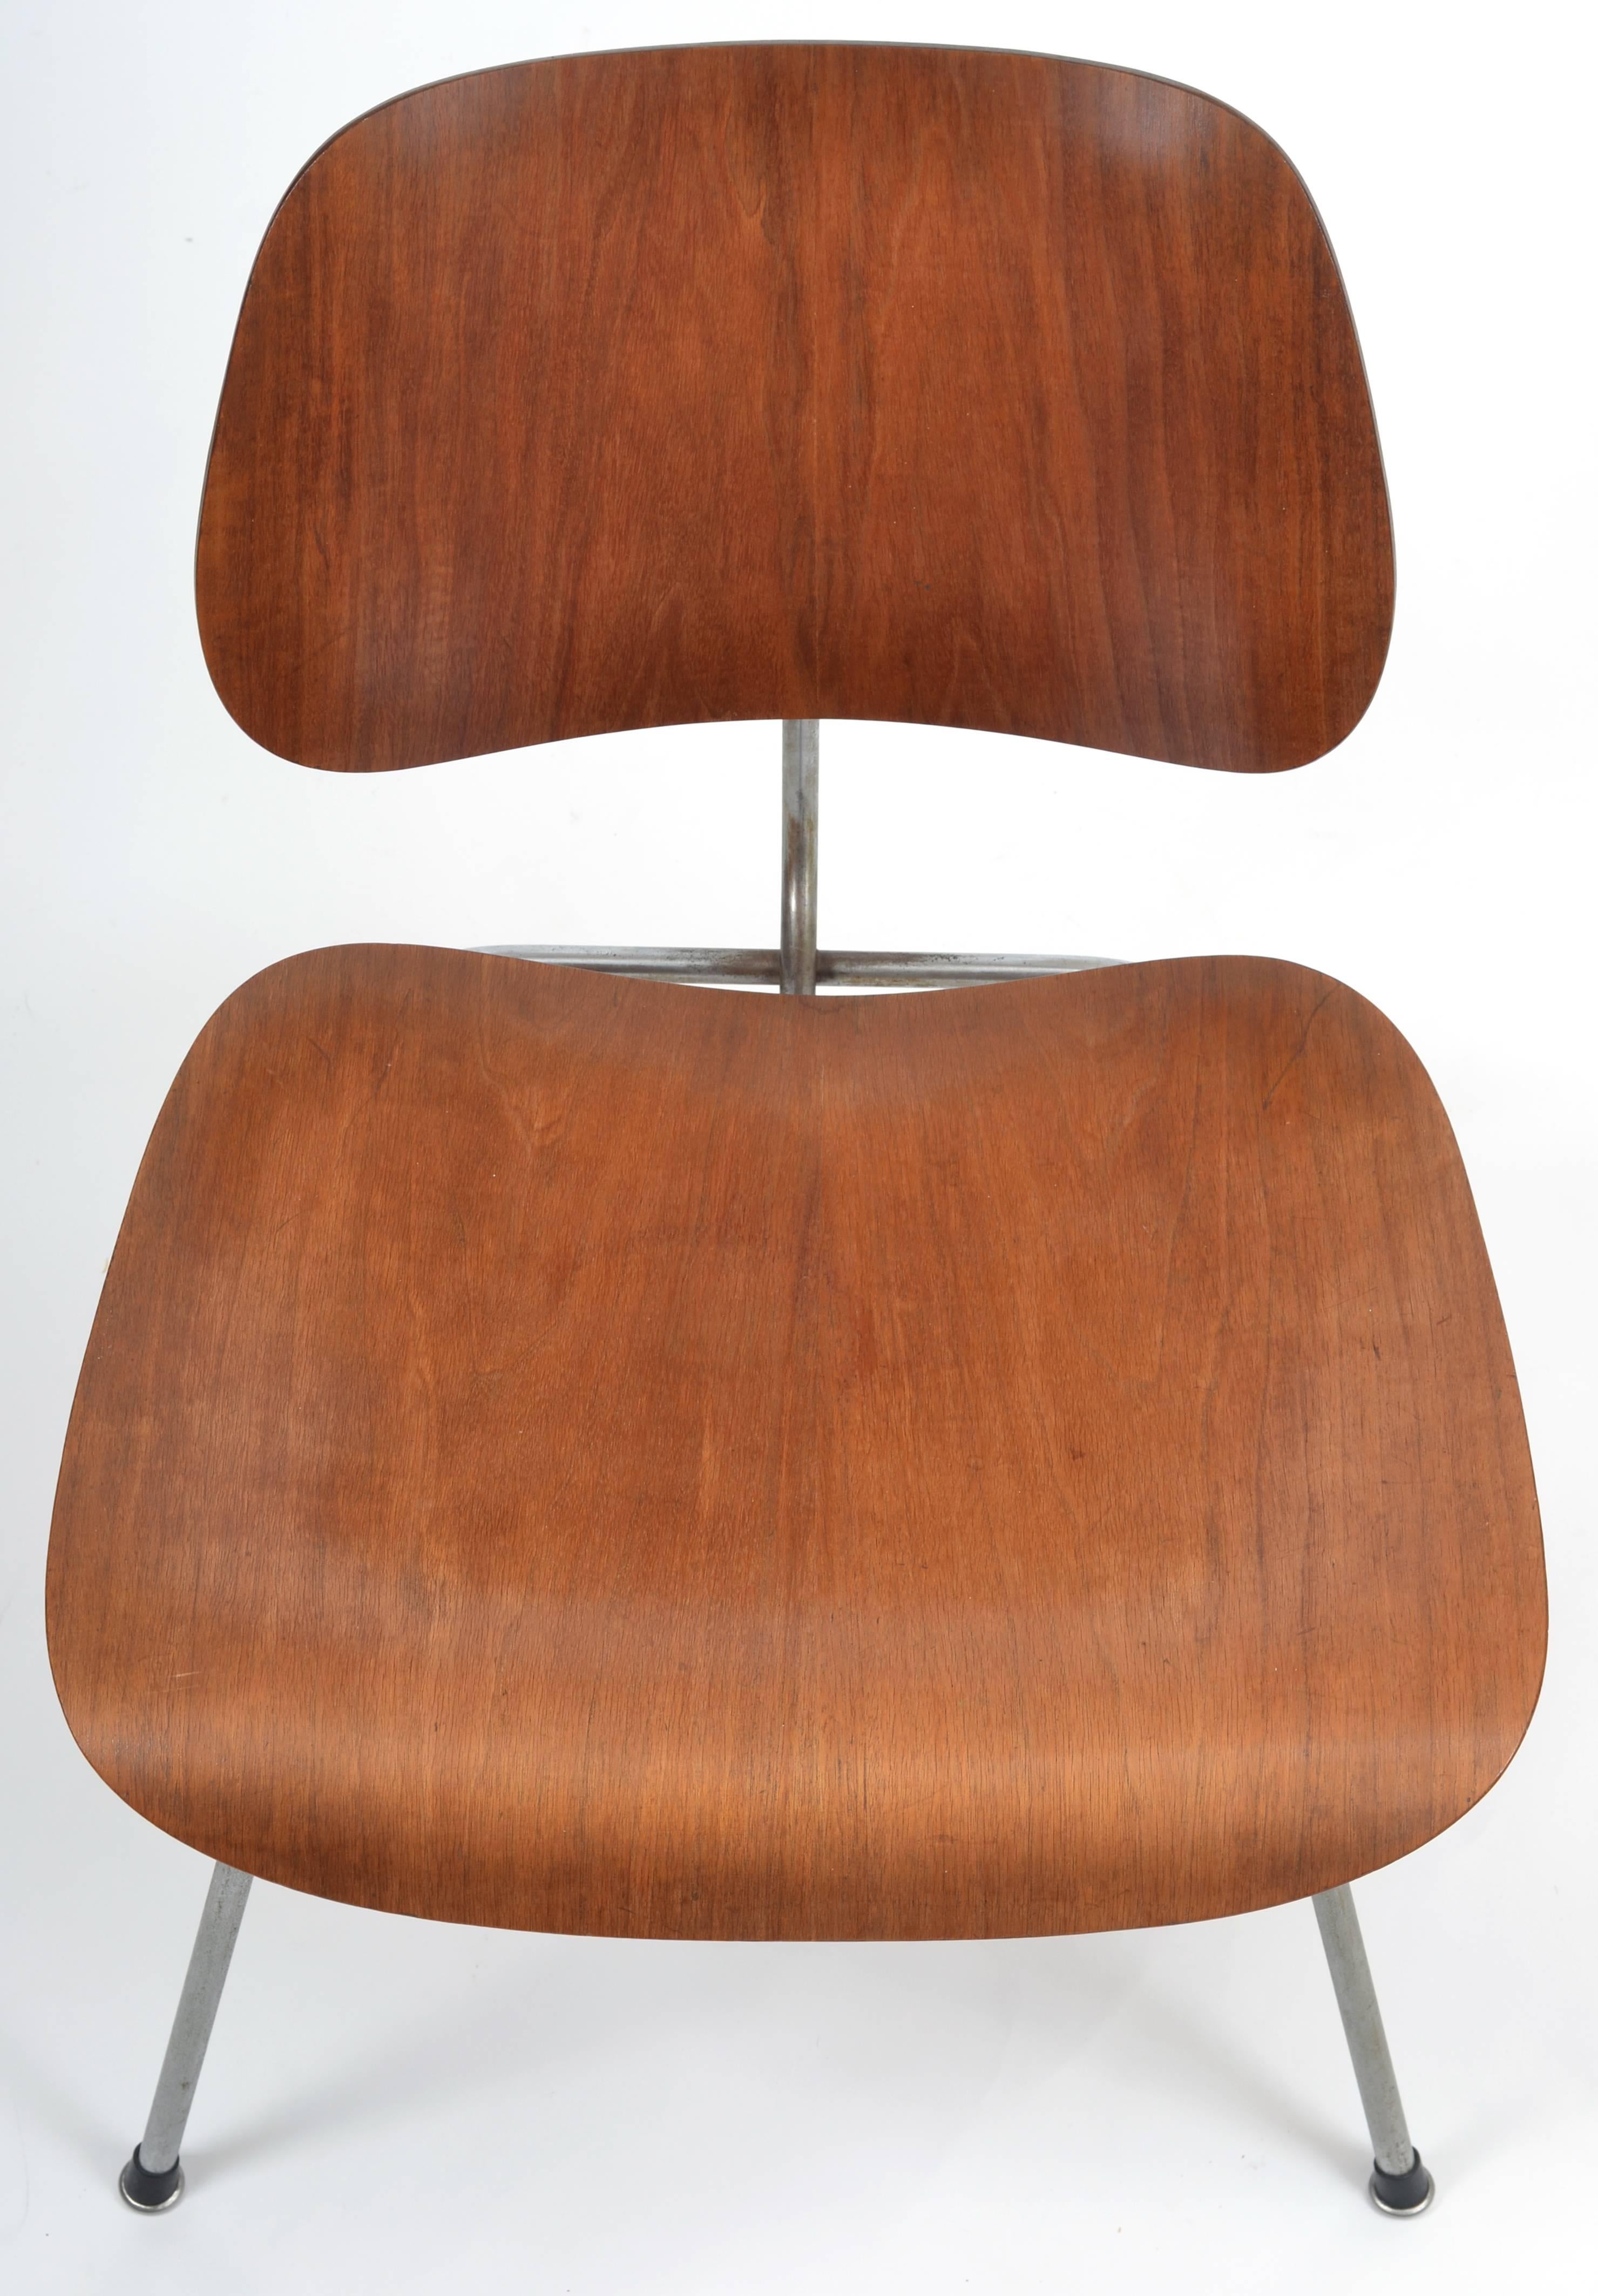 American Early Rare Teak LCM by Charles Eames for Herman Miller For Sale